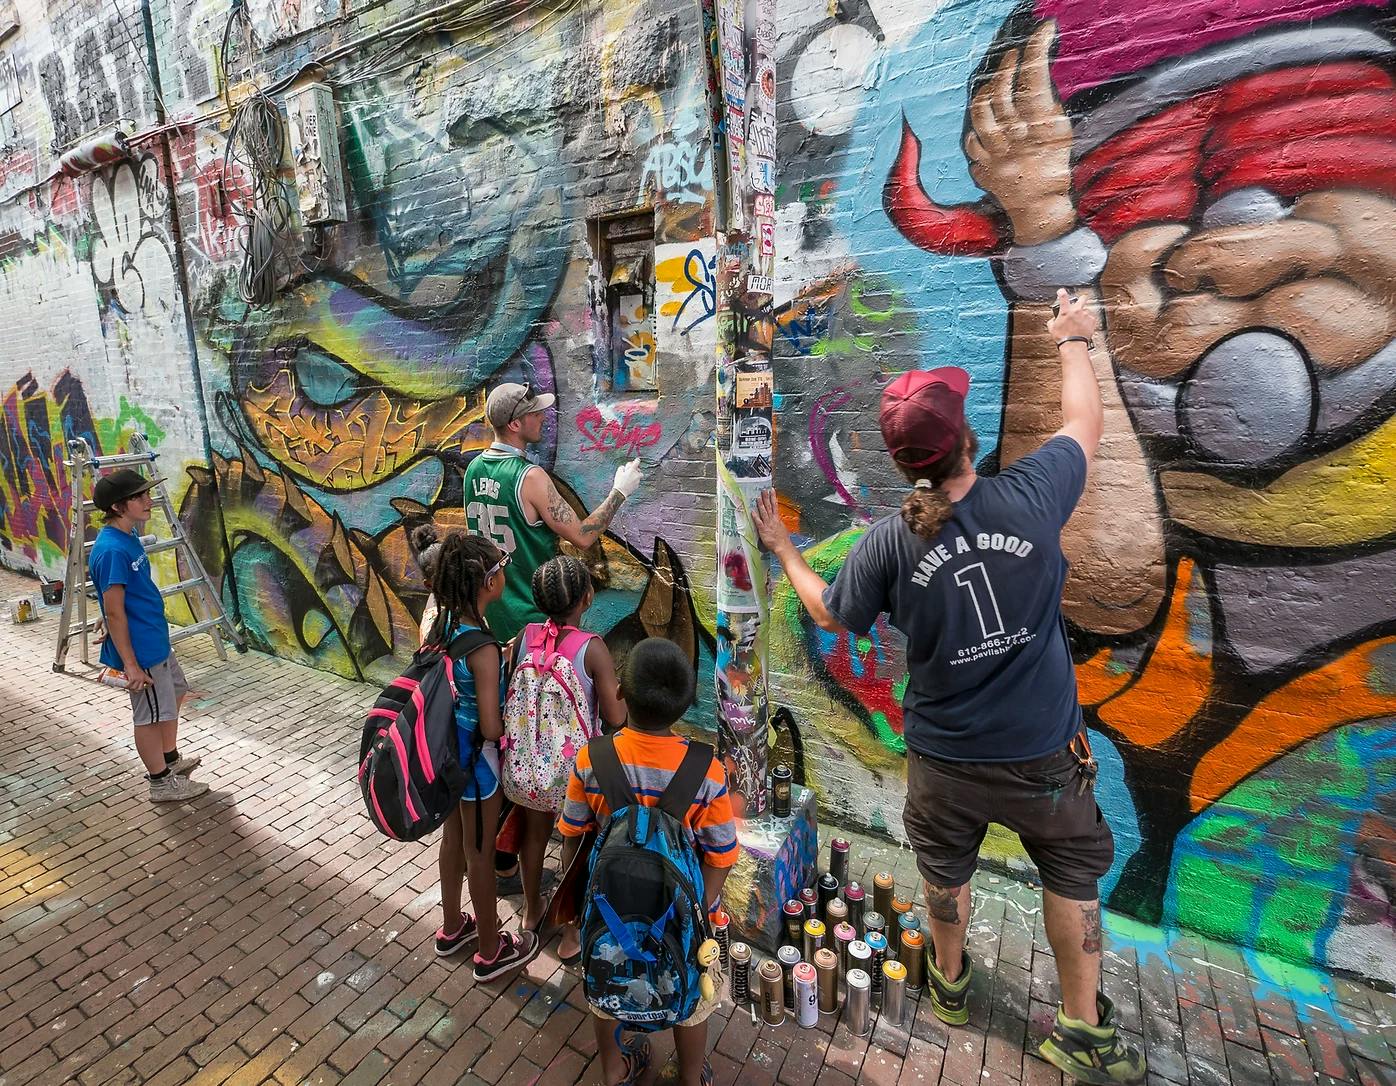 A group of children watching two graffiti artists spray paint a mural on graffiti alley